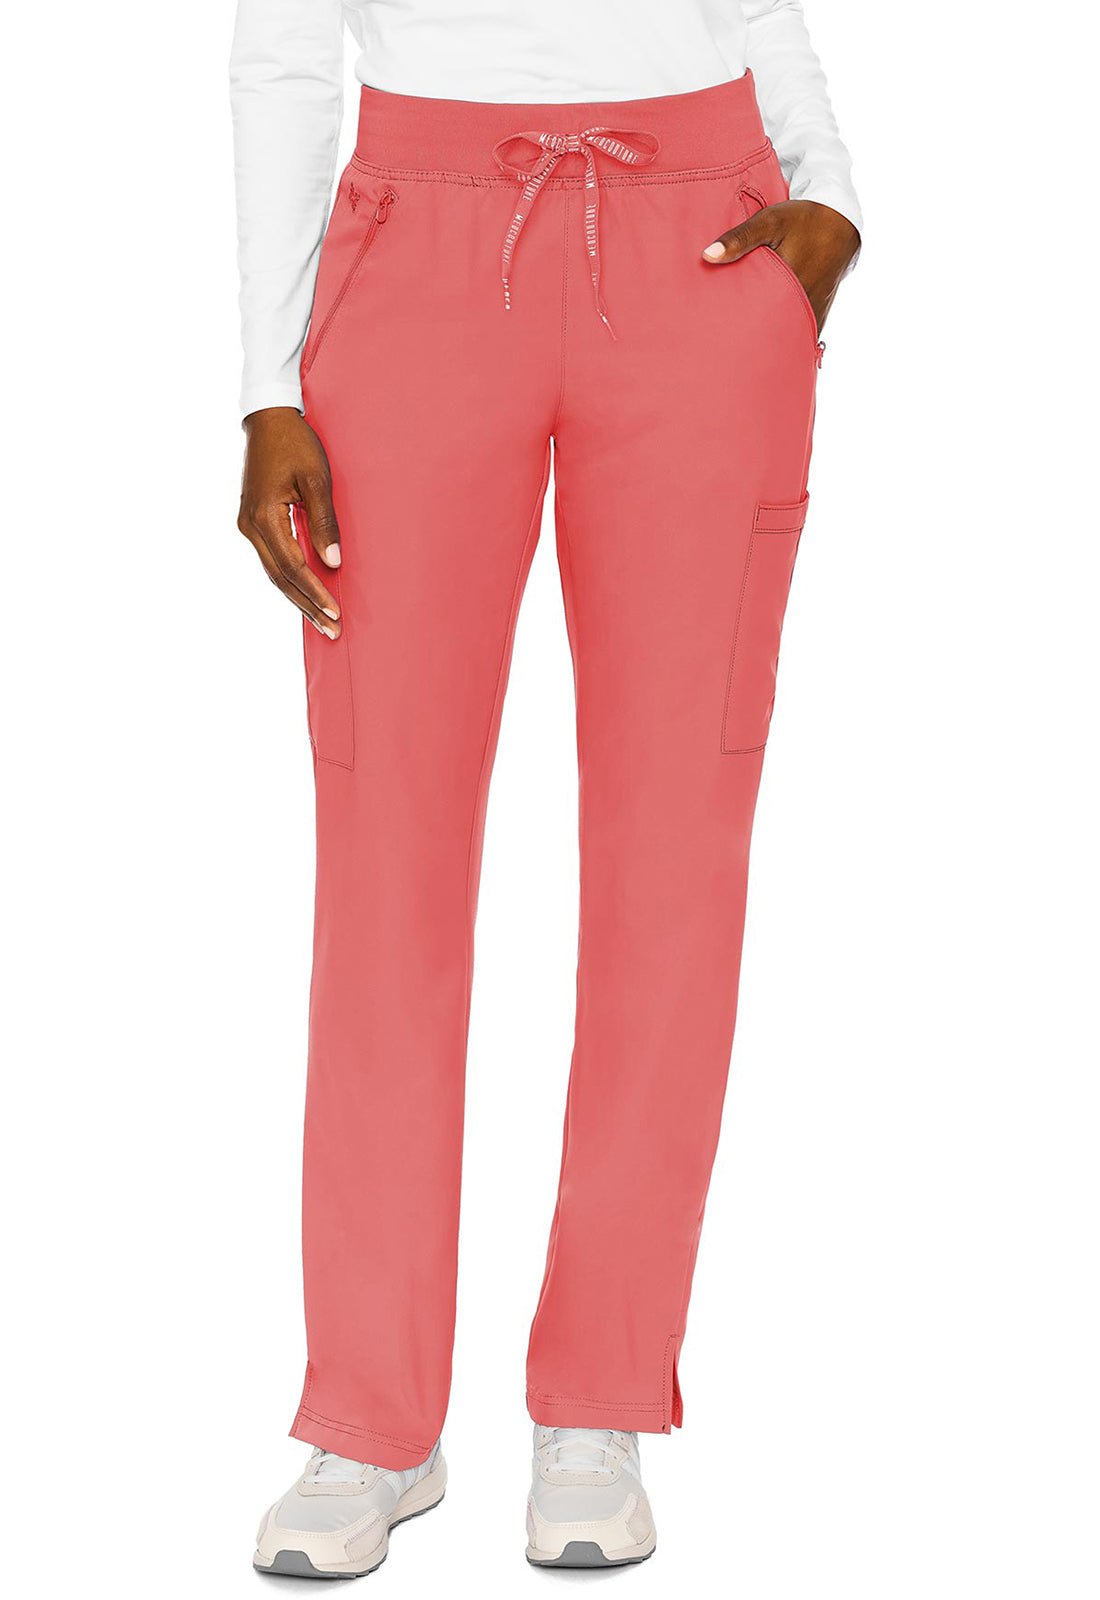 Med Couture Insight Drawstring Scrub Pant MC2702 in Coral, Grape, Lila –  Scrubs Select